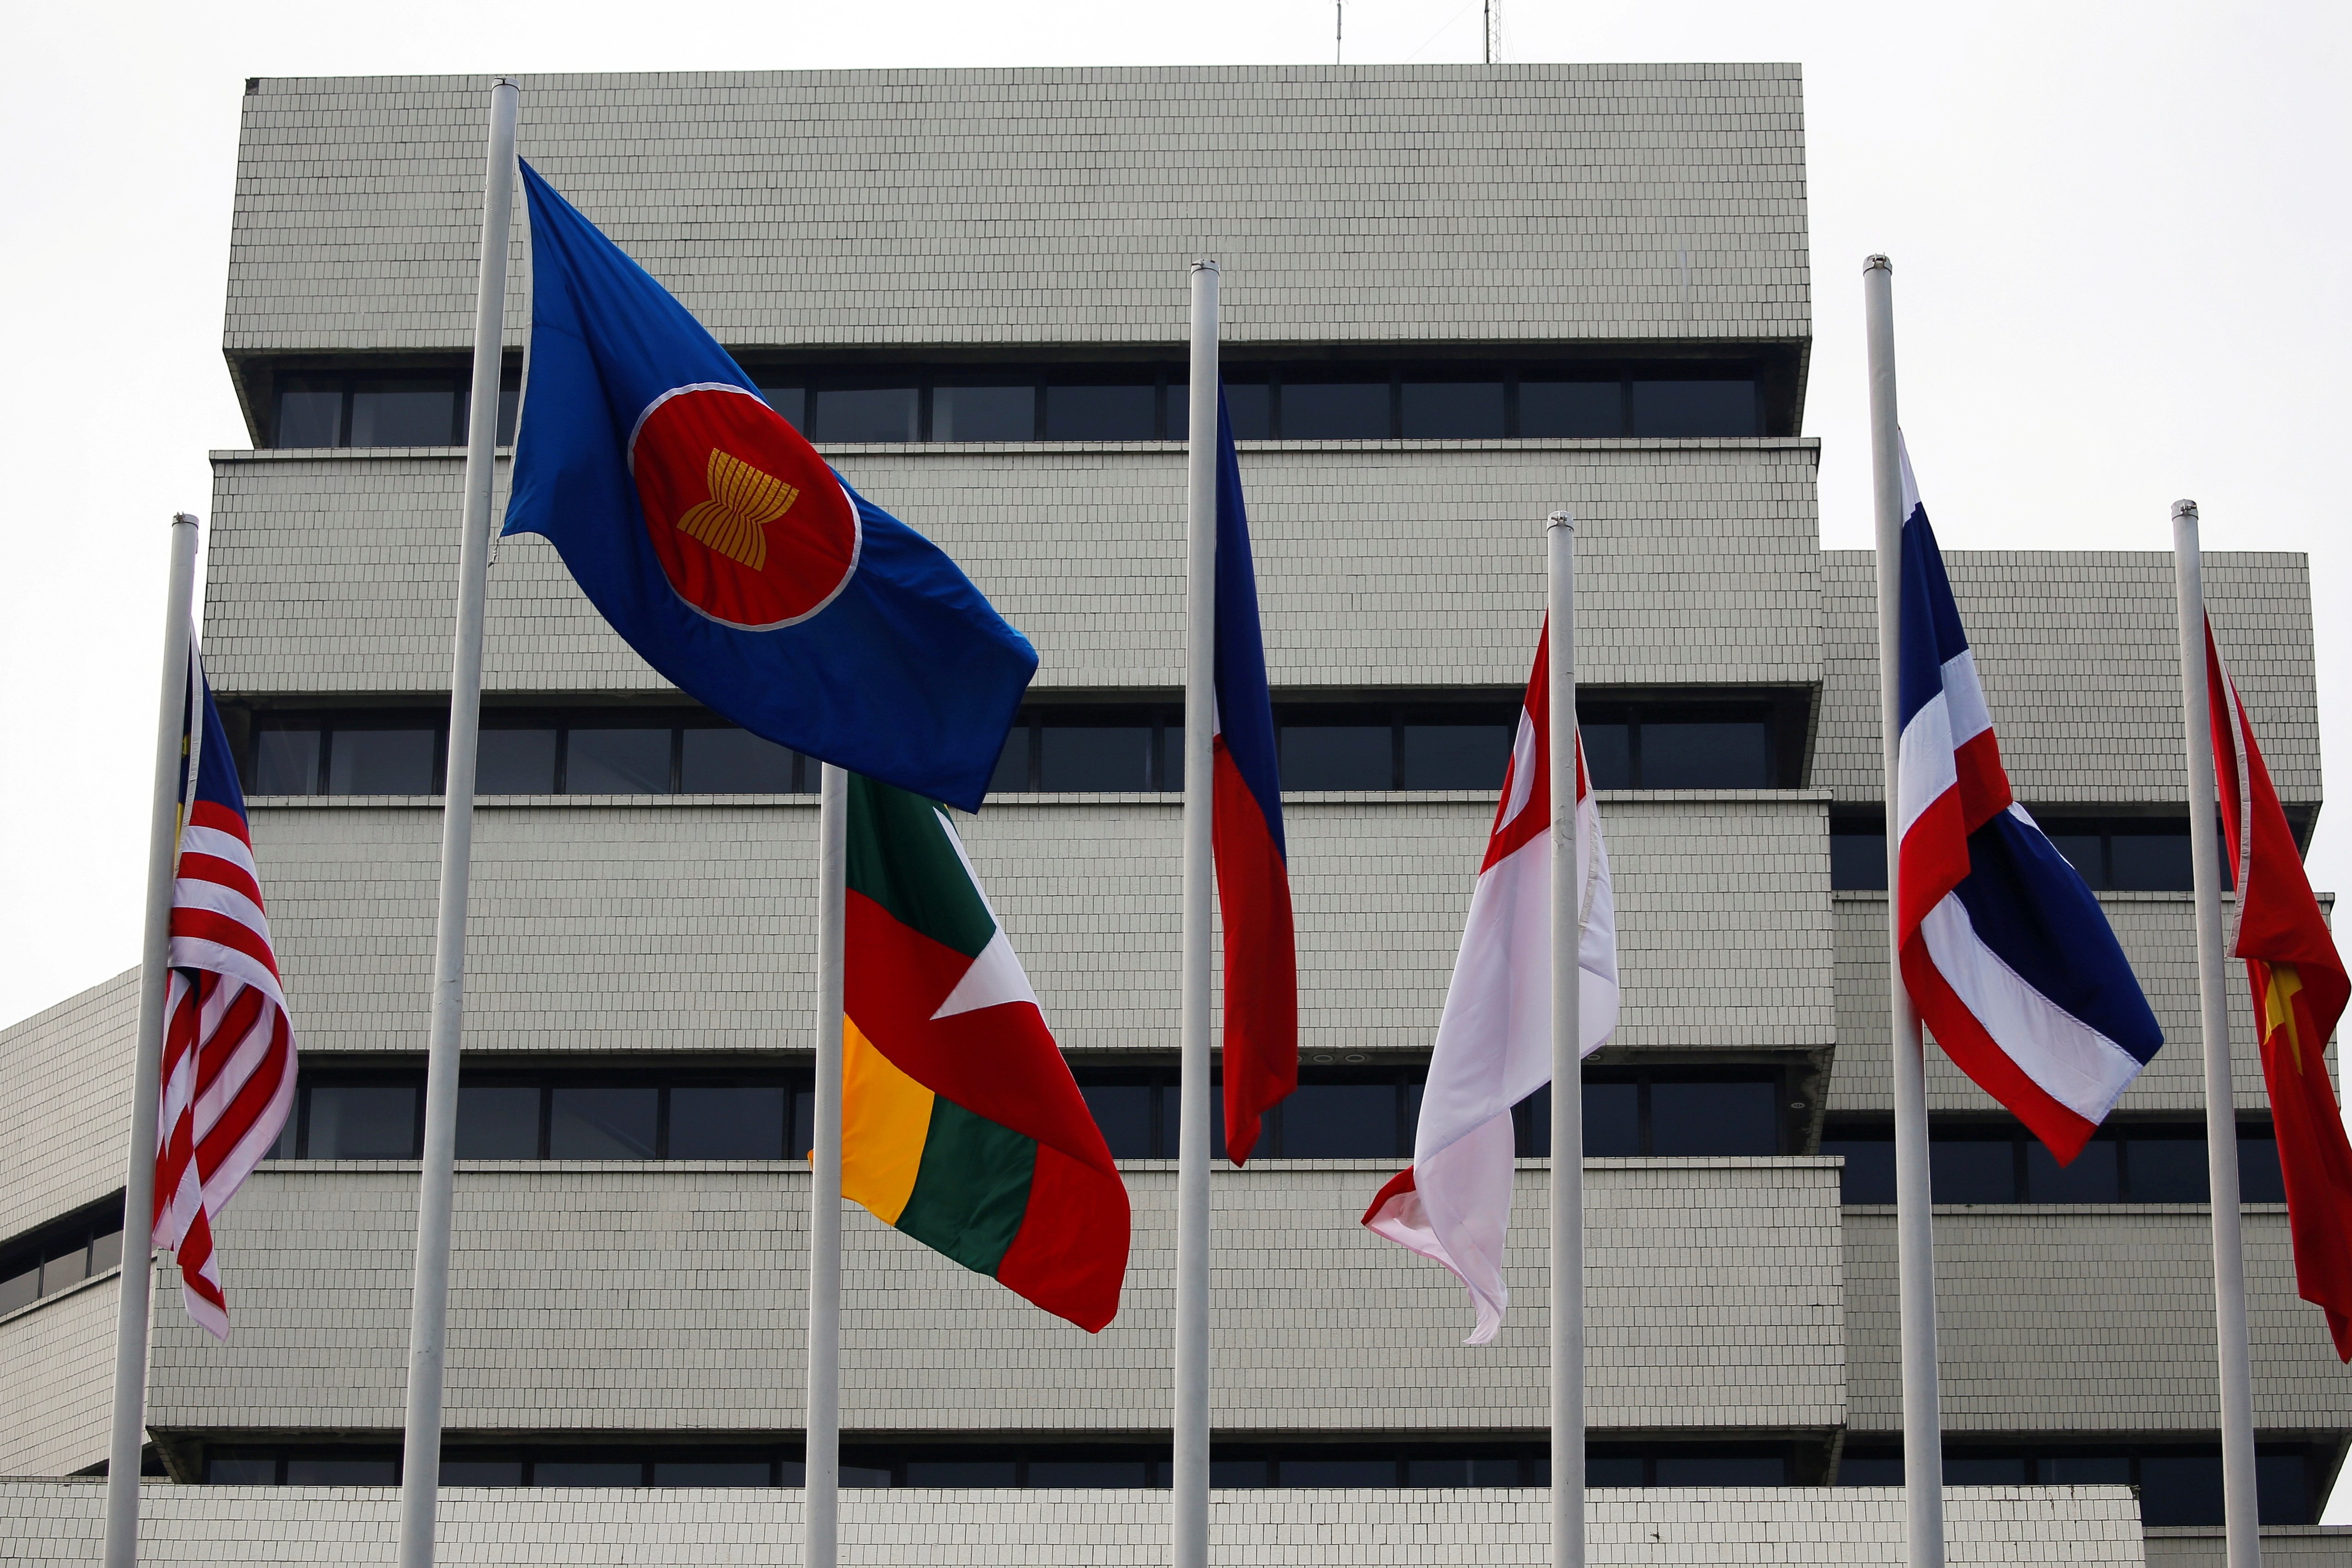 Flags are seen outside the Association of Southeast Asian Nations (ASEAN) secretariat building, ahead of the ASEAN leaders' meeting in Jakarta, Indonesia, April 23, 2021. REUTERS/Willy Kurniawan/File Photo